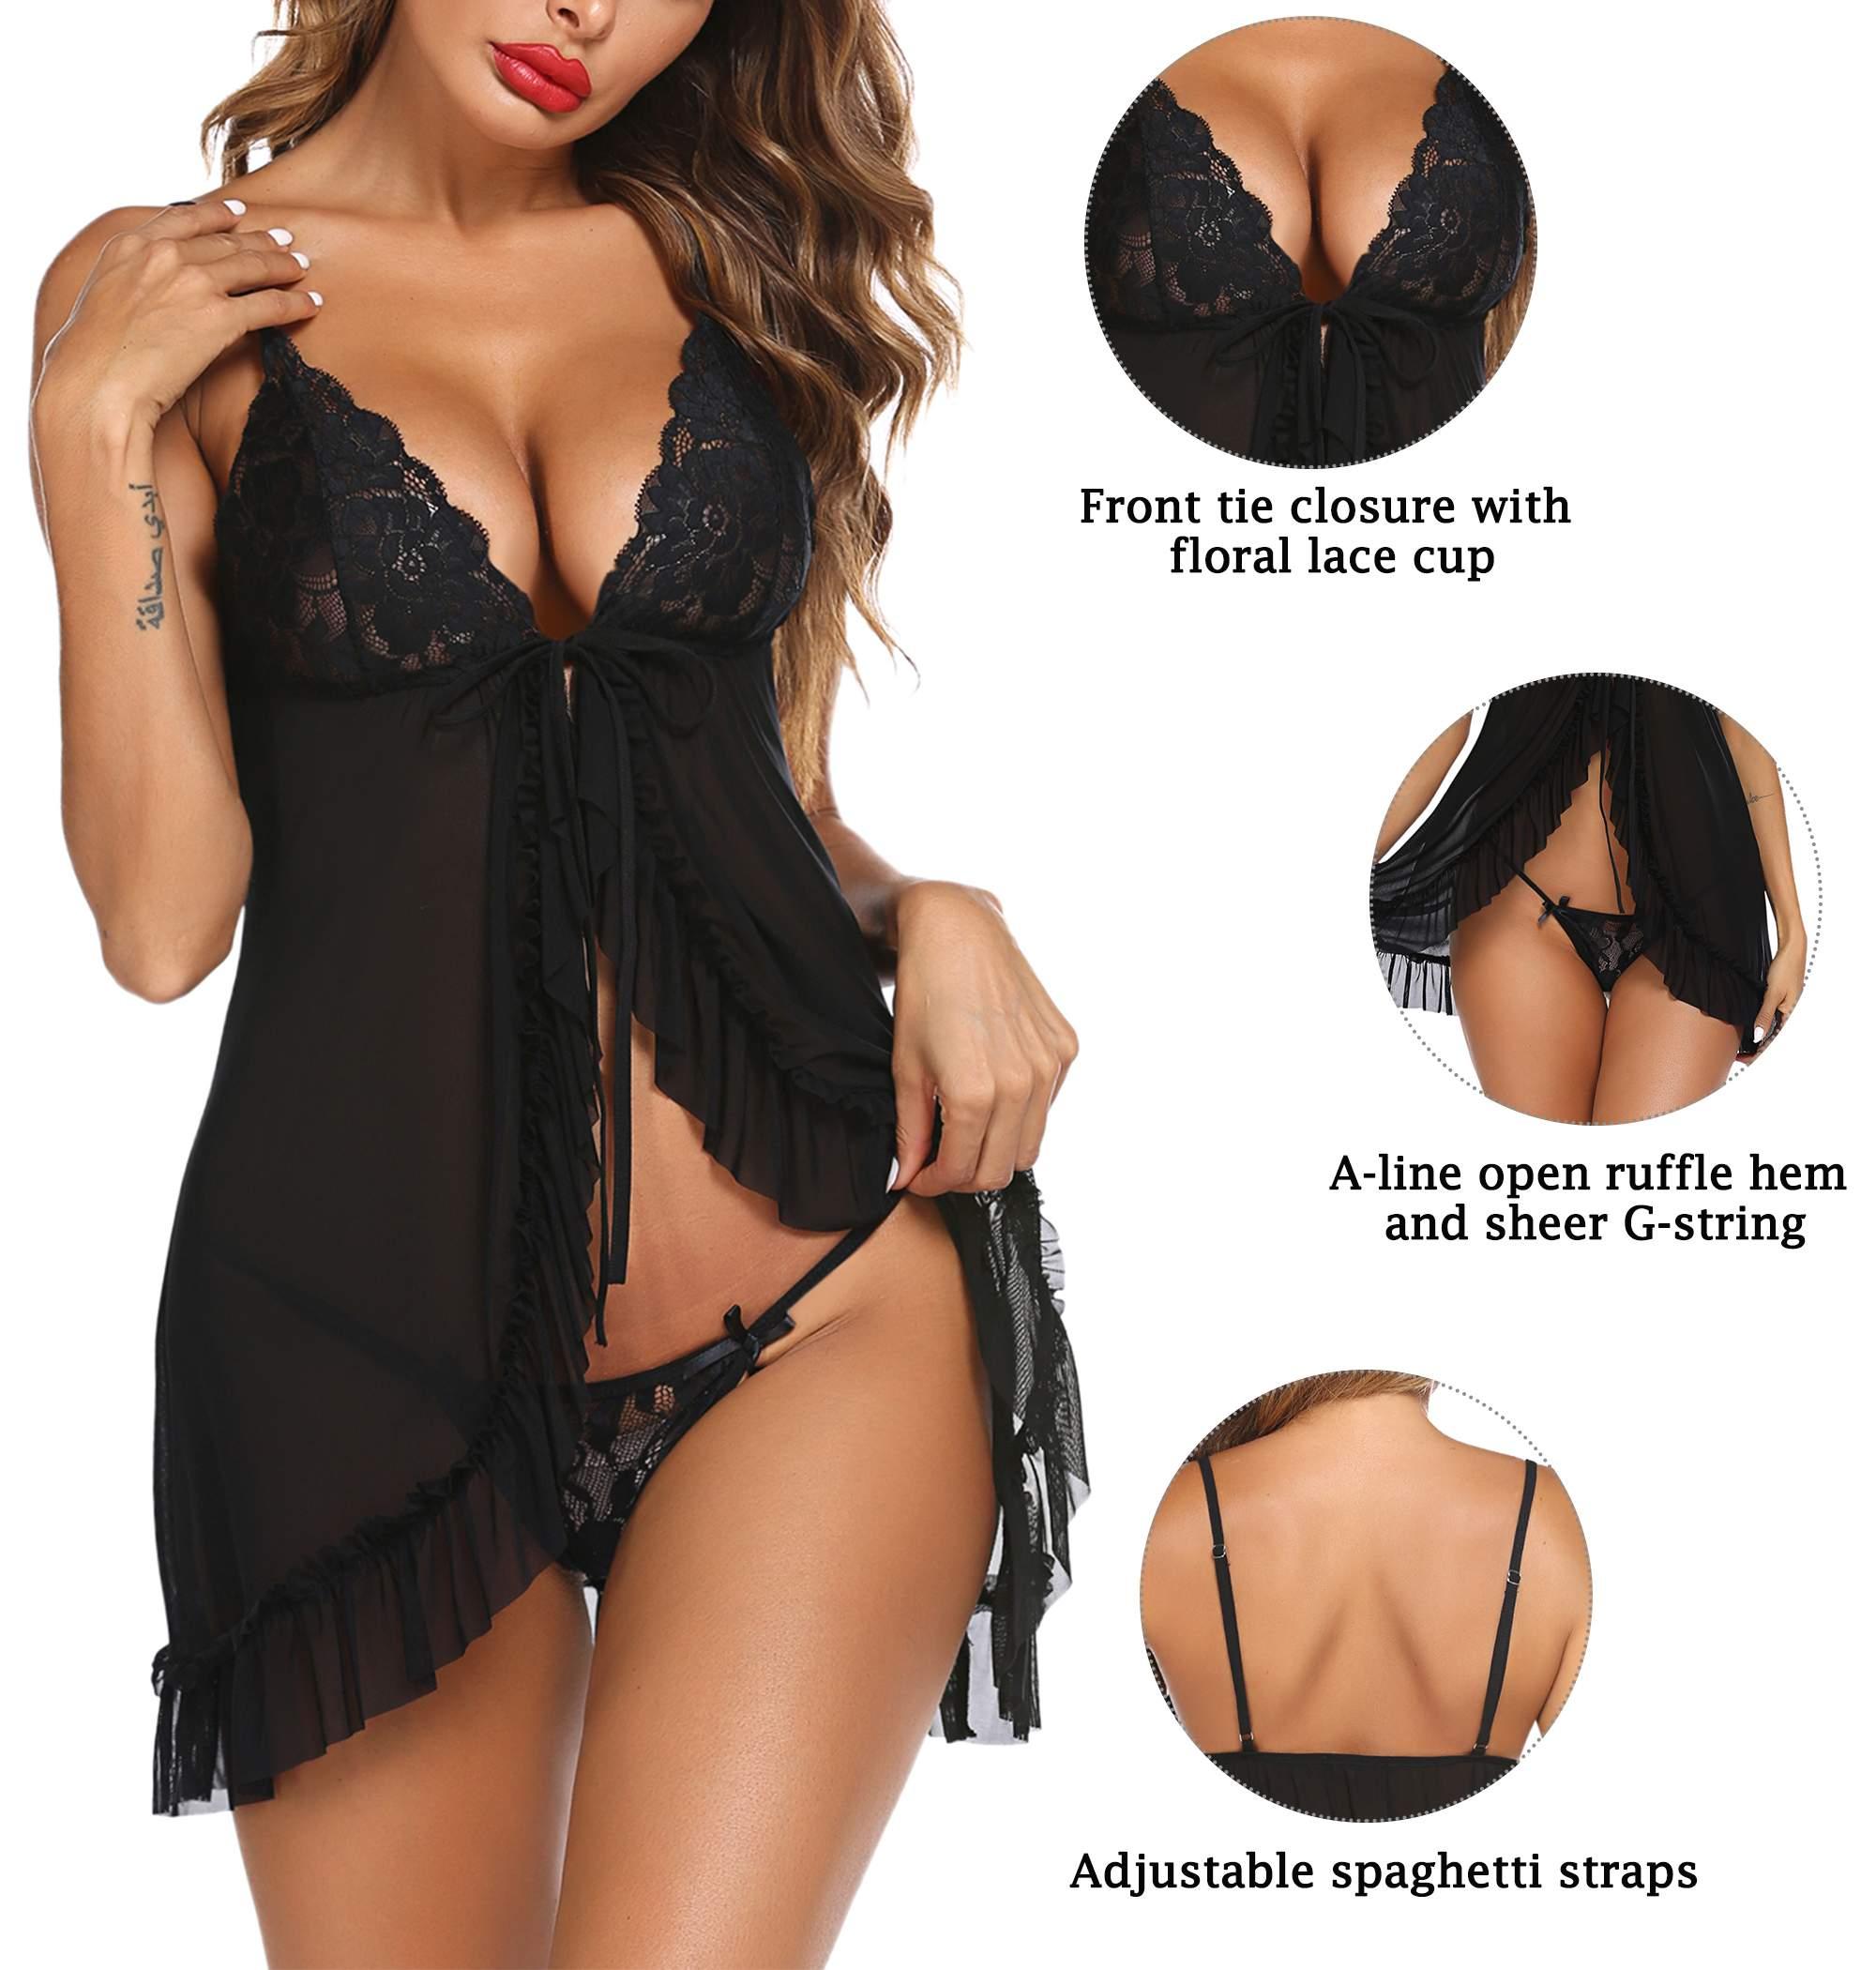 Avidlove Babydoll Lingerie for Women Lace Front Closure Lingerie V Neck Nightwear Sexy Chemise Nightie - image 2 of 5